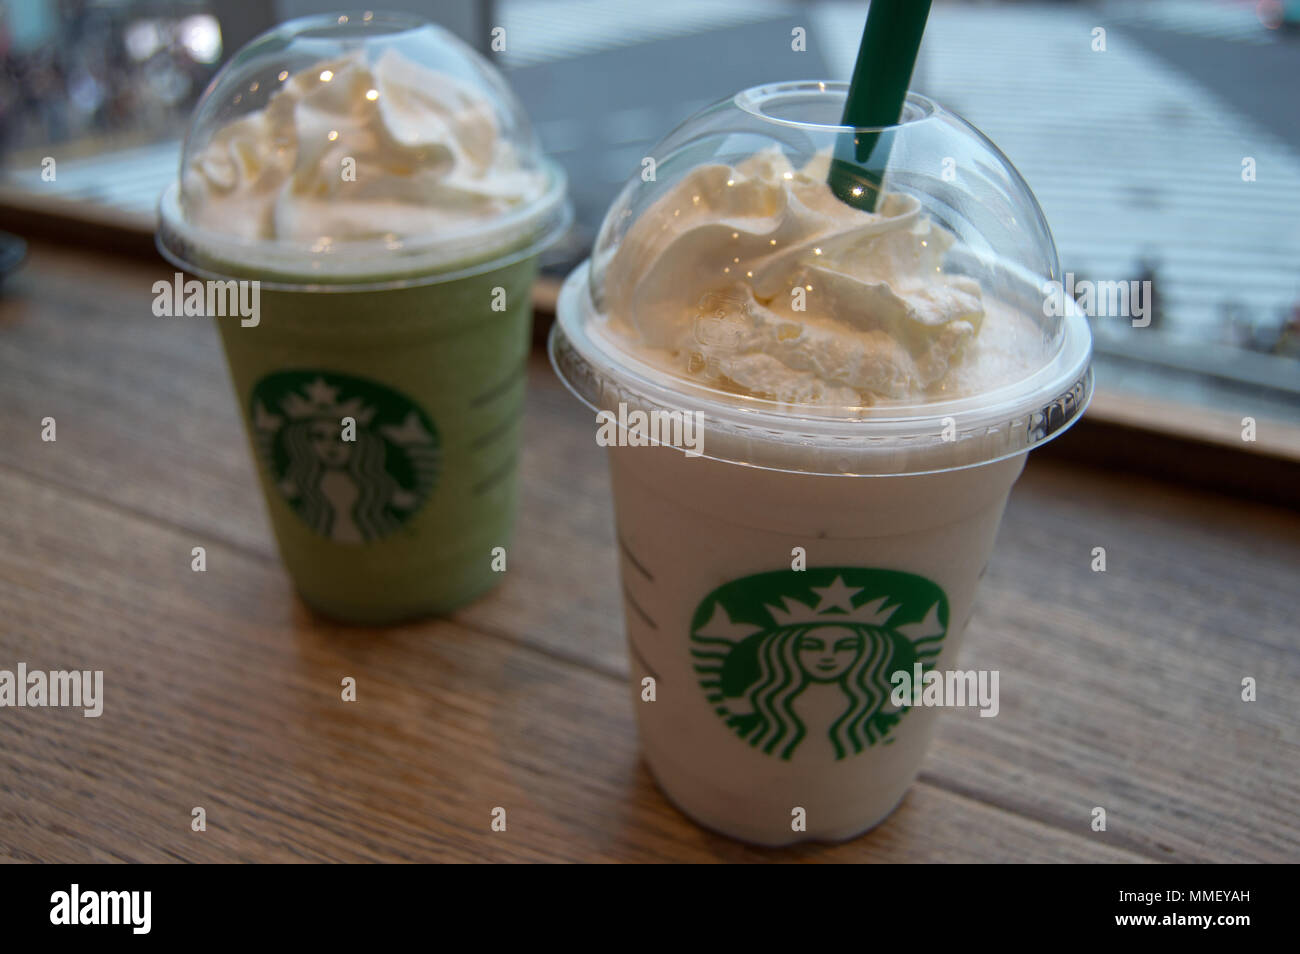 Japanese Starbucks drinks including Matcha latte with Shibuya crossing in  the background Stock Photo - Alamy